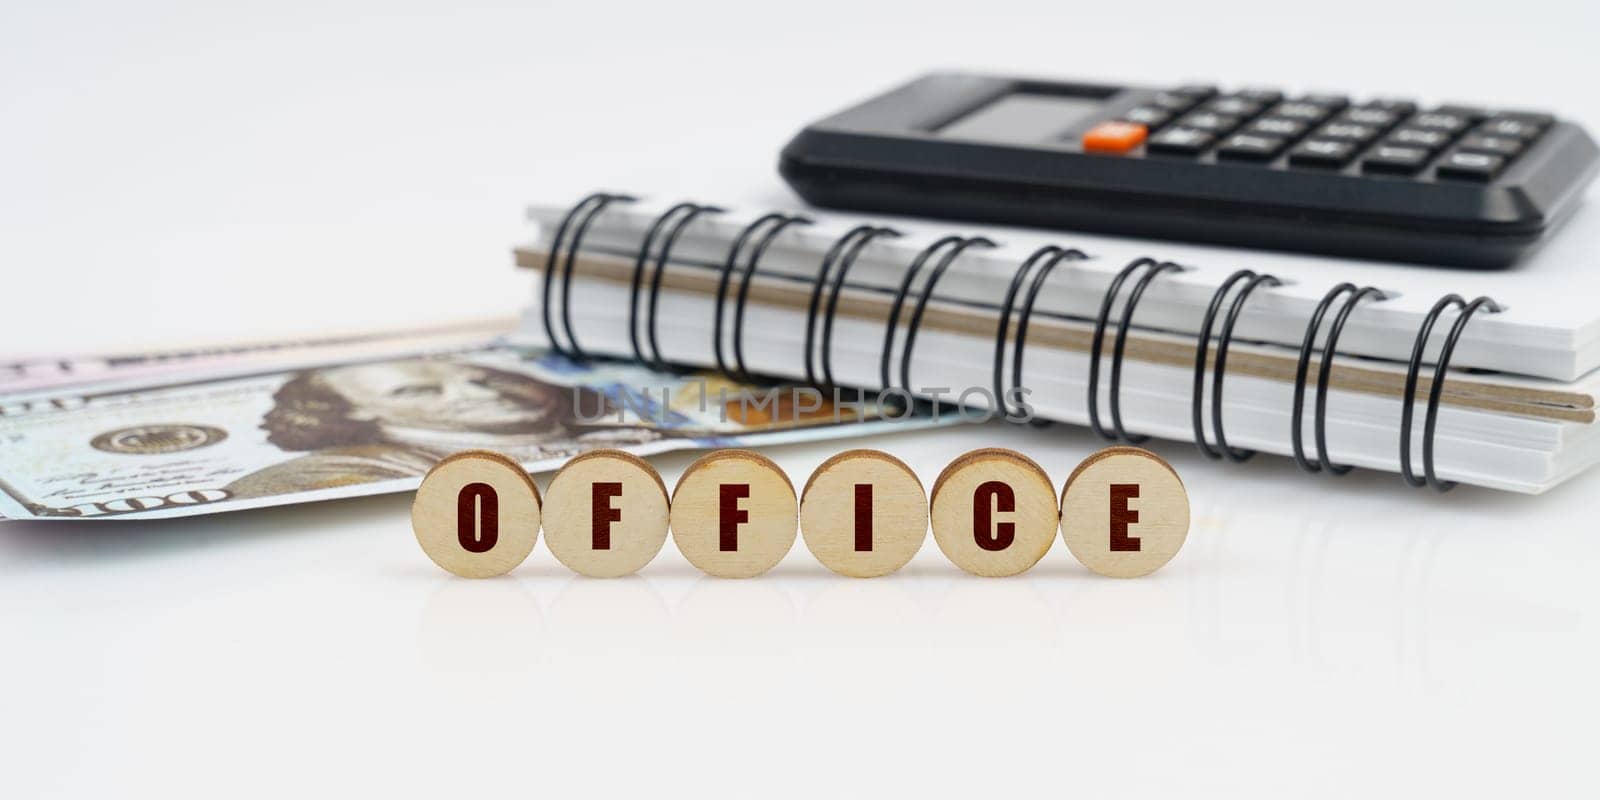 Business and finance concept. On a high surface lie a notepad, a calculator, dollars and wooden circles with the inscription - OFFICE